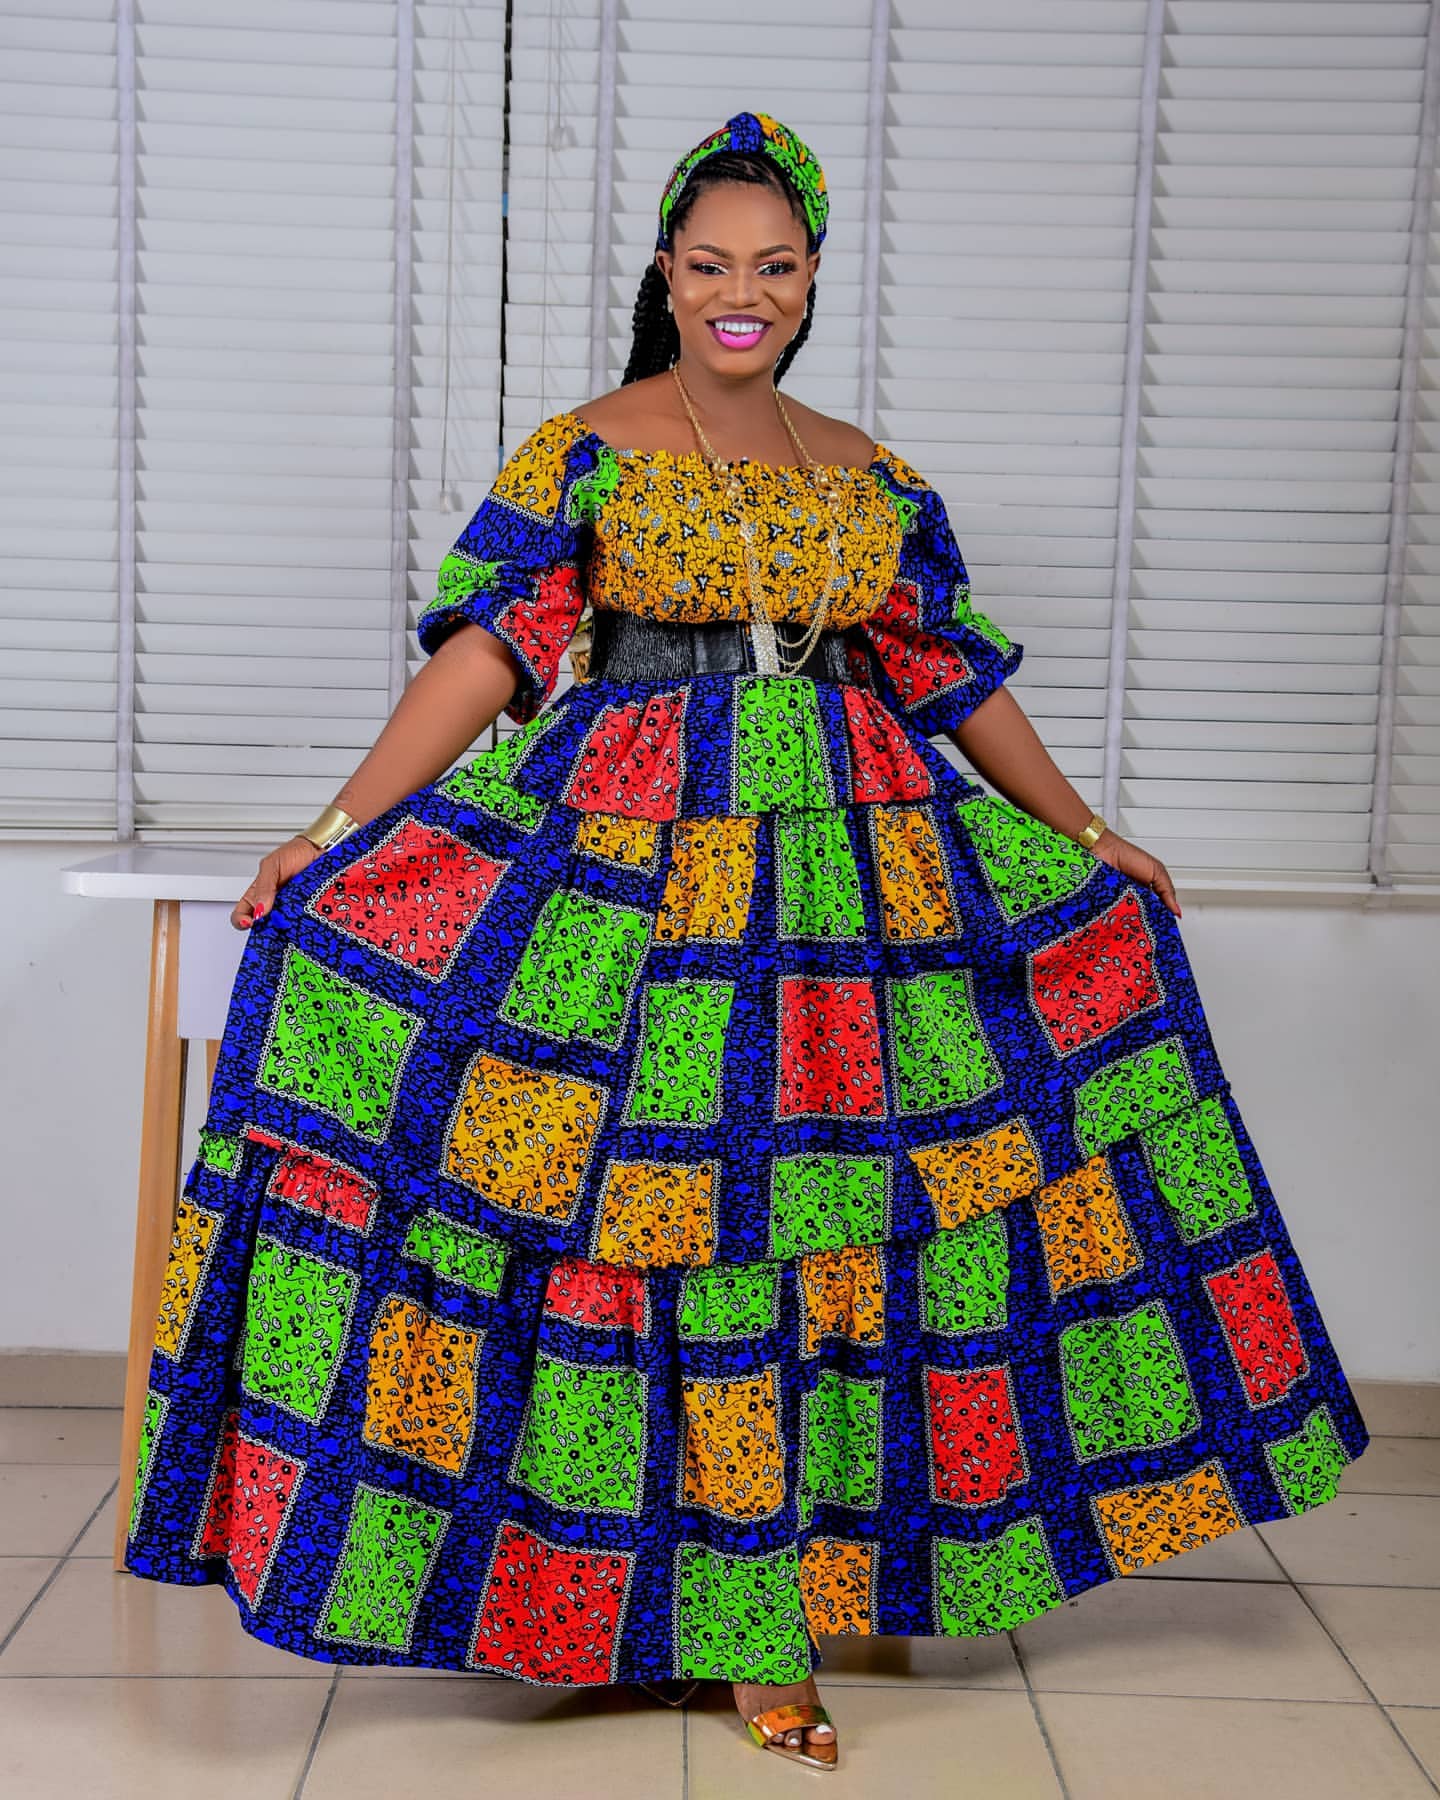 Fascinating and Pretty Styles for Church and Other Occasions – OD9JASTYLES